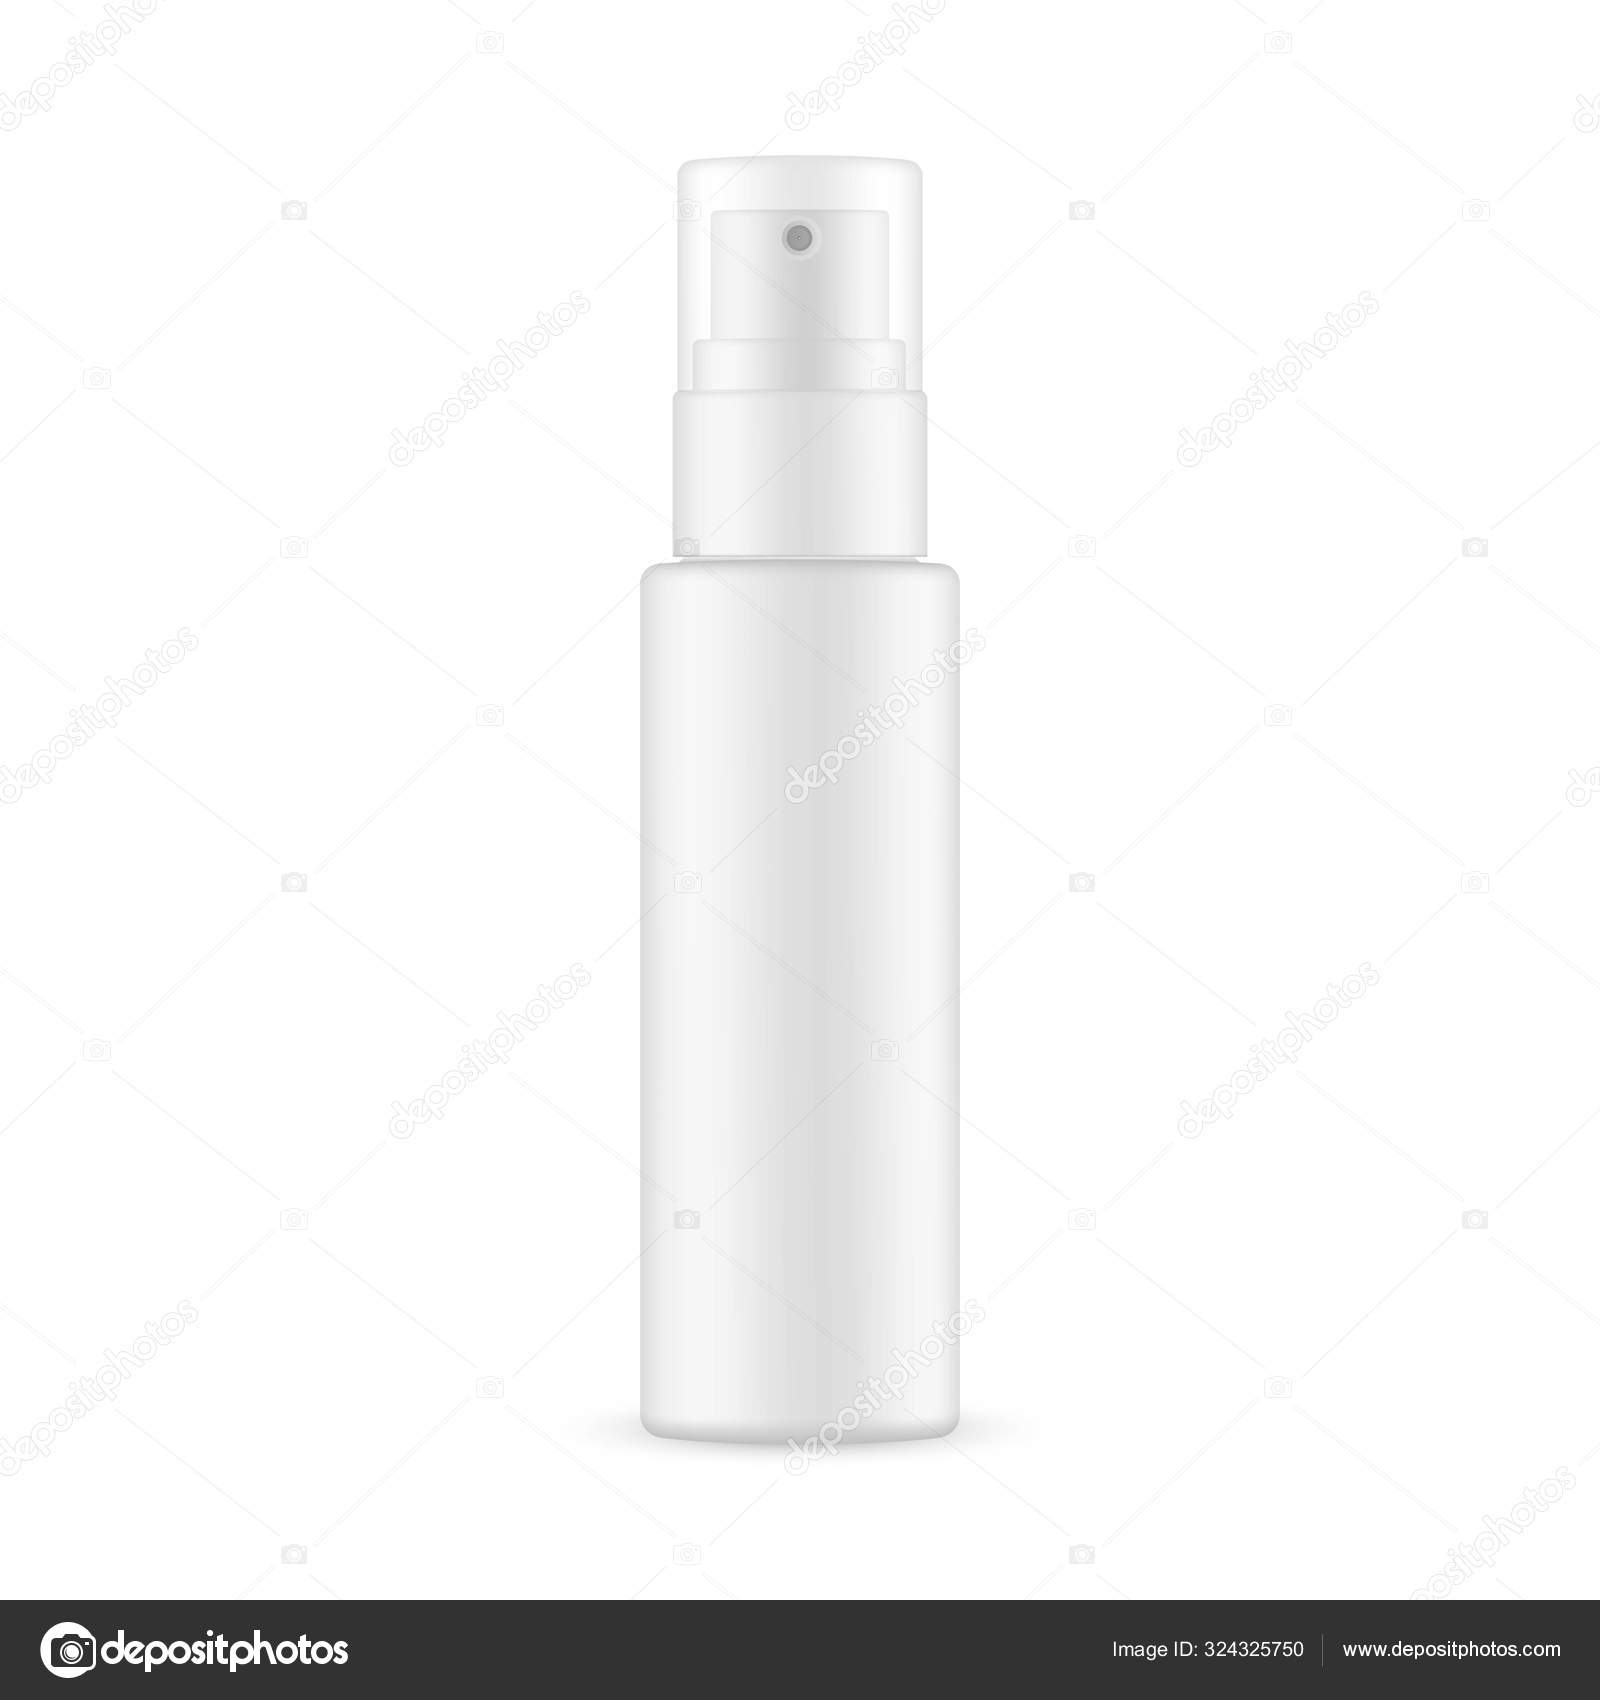 Download Plastic Spray Bottle Transparent Cap Mockup Isolated White Background Vector Stock Vector Evgeniyzimin Vector Image By C 324325750